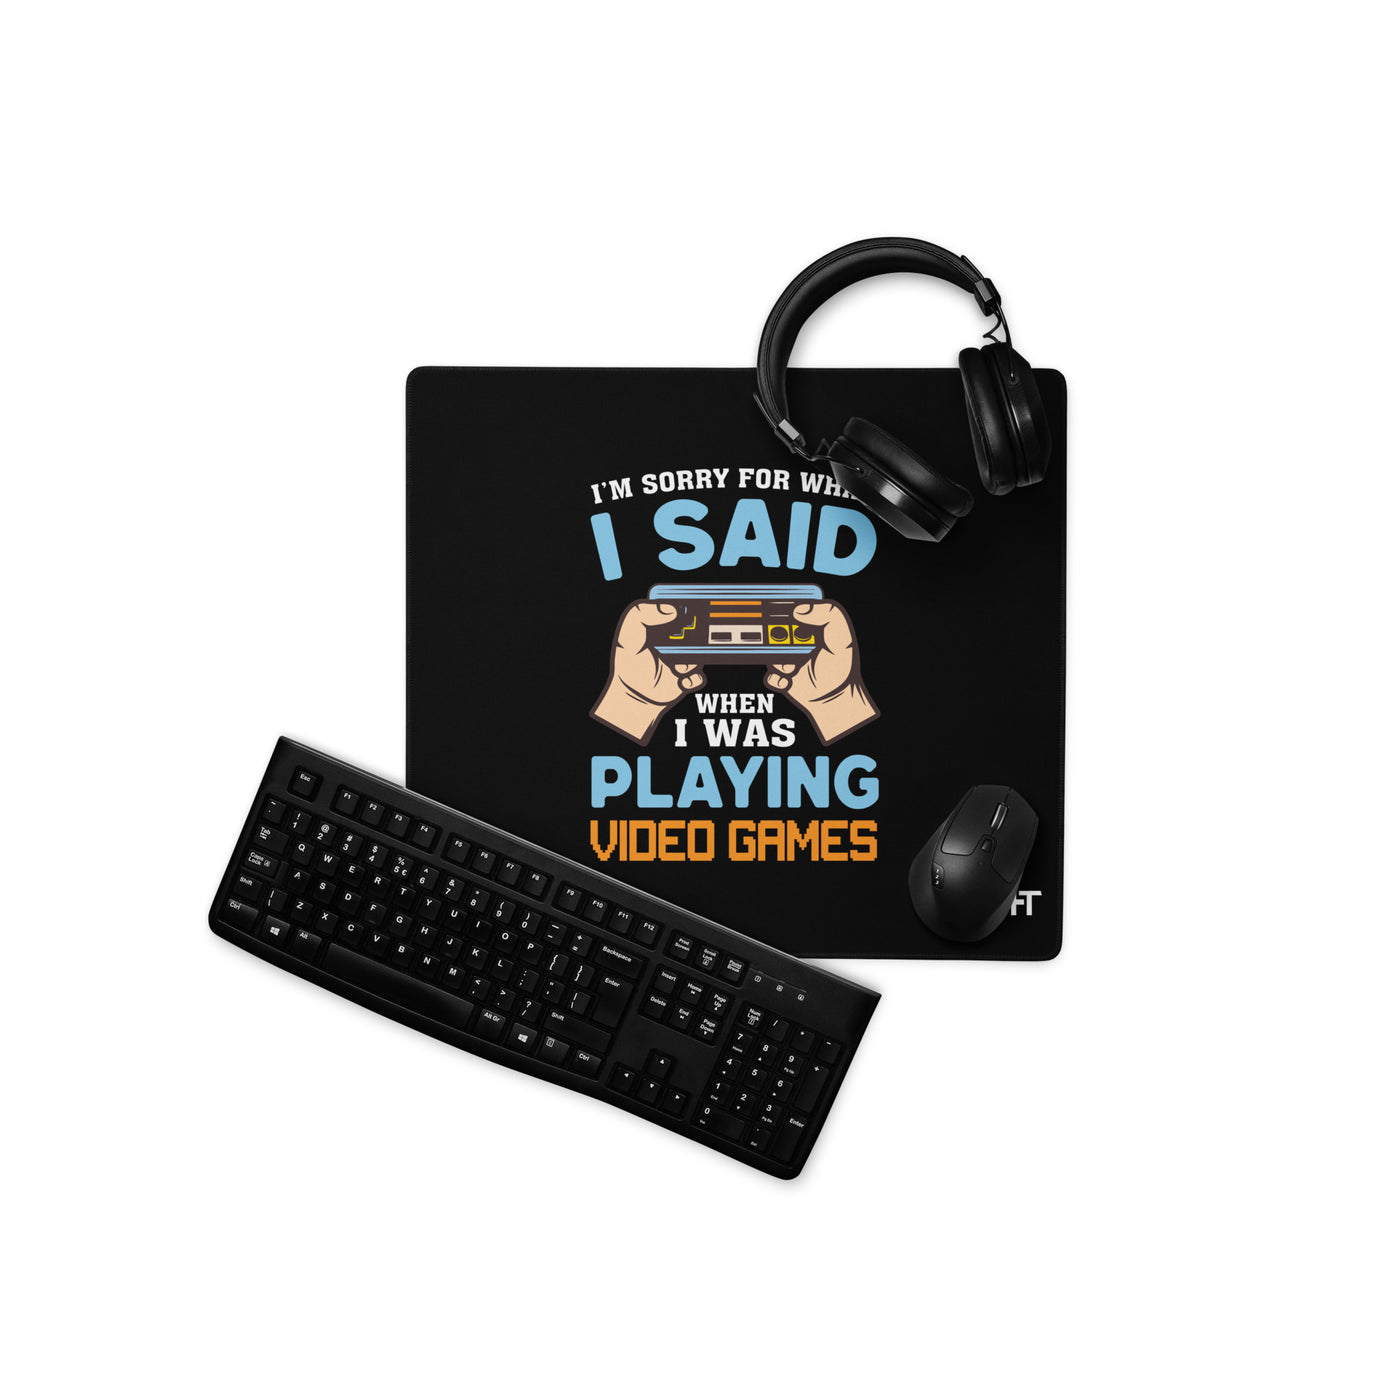 I'm sorry for what I Said, when I was playing Video Games - Desk Mat